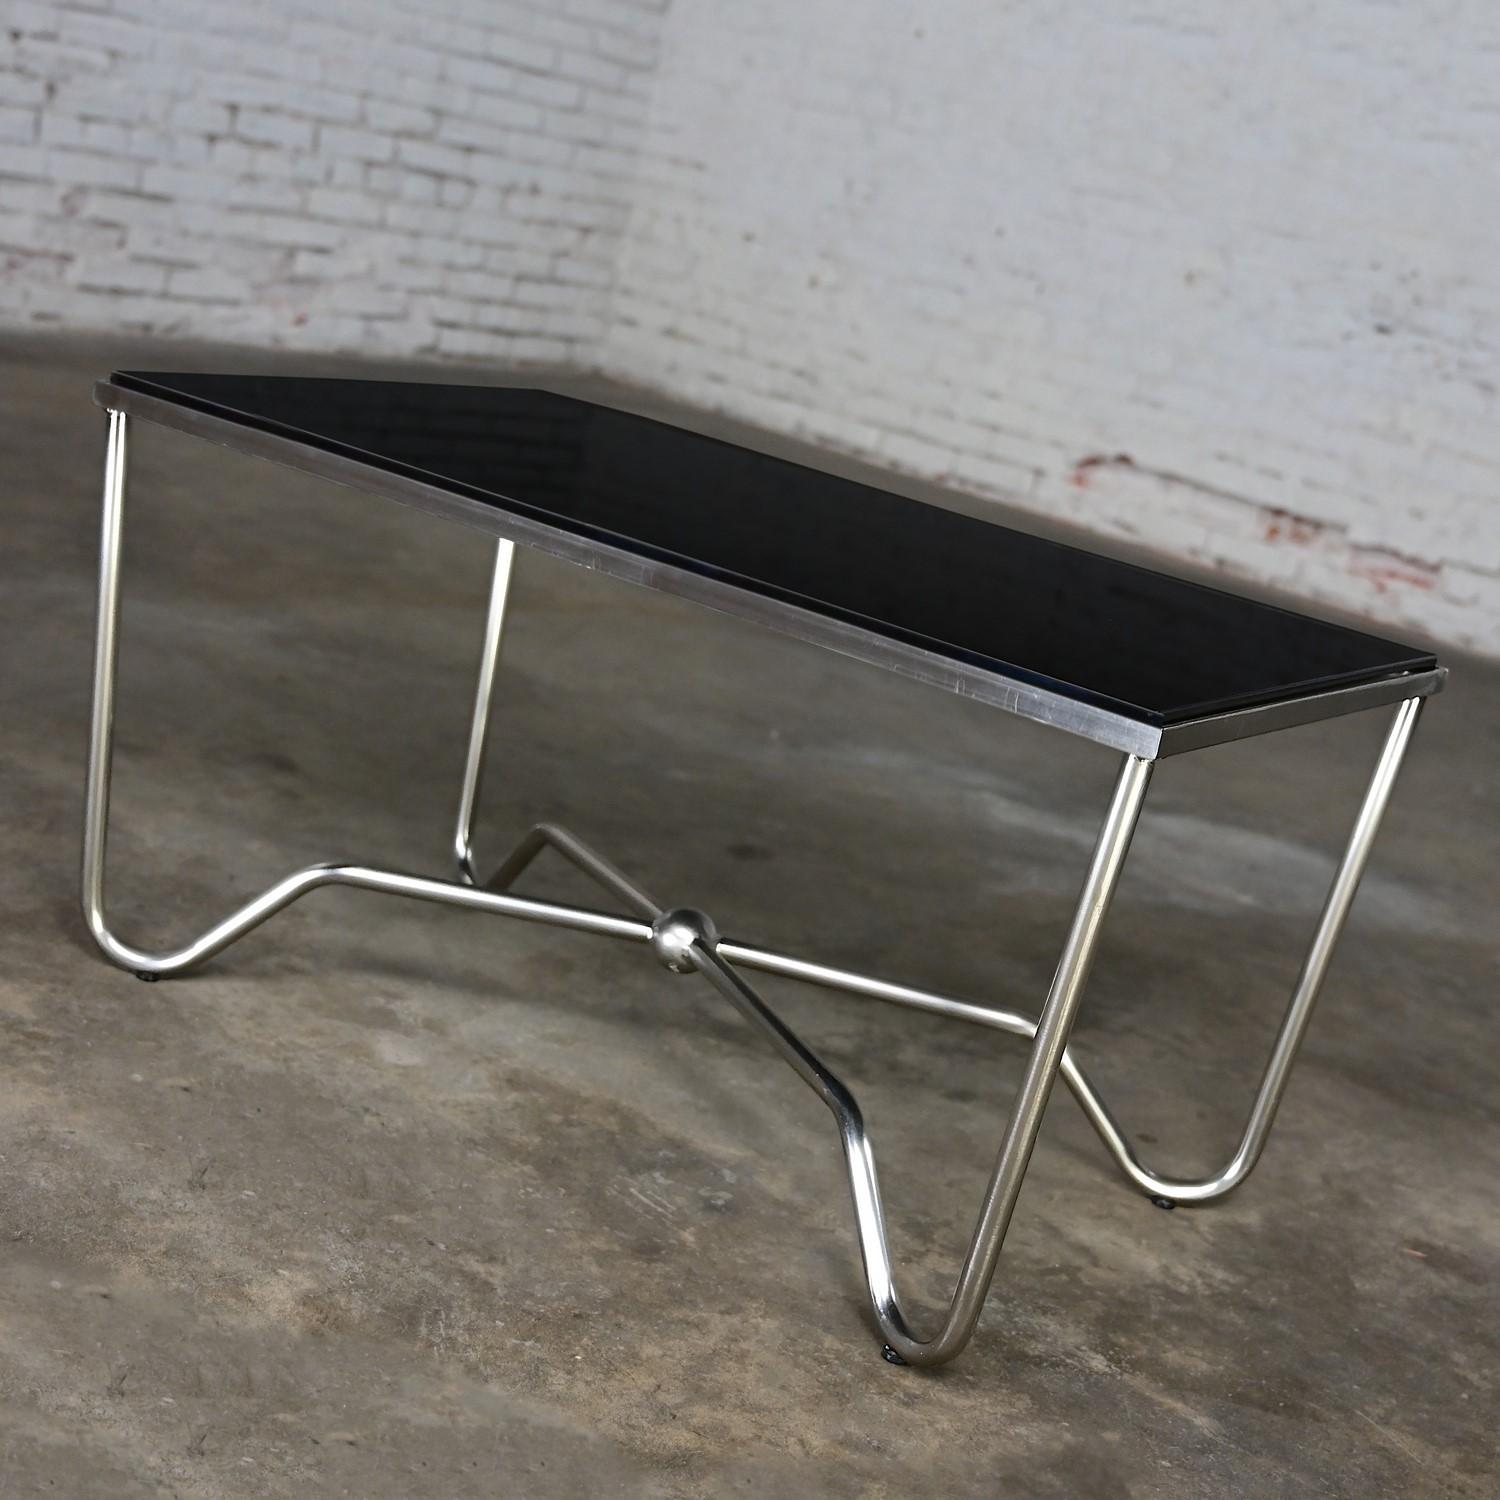 Handsome vintage Modern brushed steel tube coffee table with a removeable rectangular black glass top insert. Beautiful condition, keeping in mind that this is vintage and not new so will have signs of use and wear even if it has been refinished or